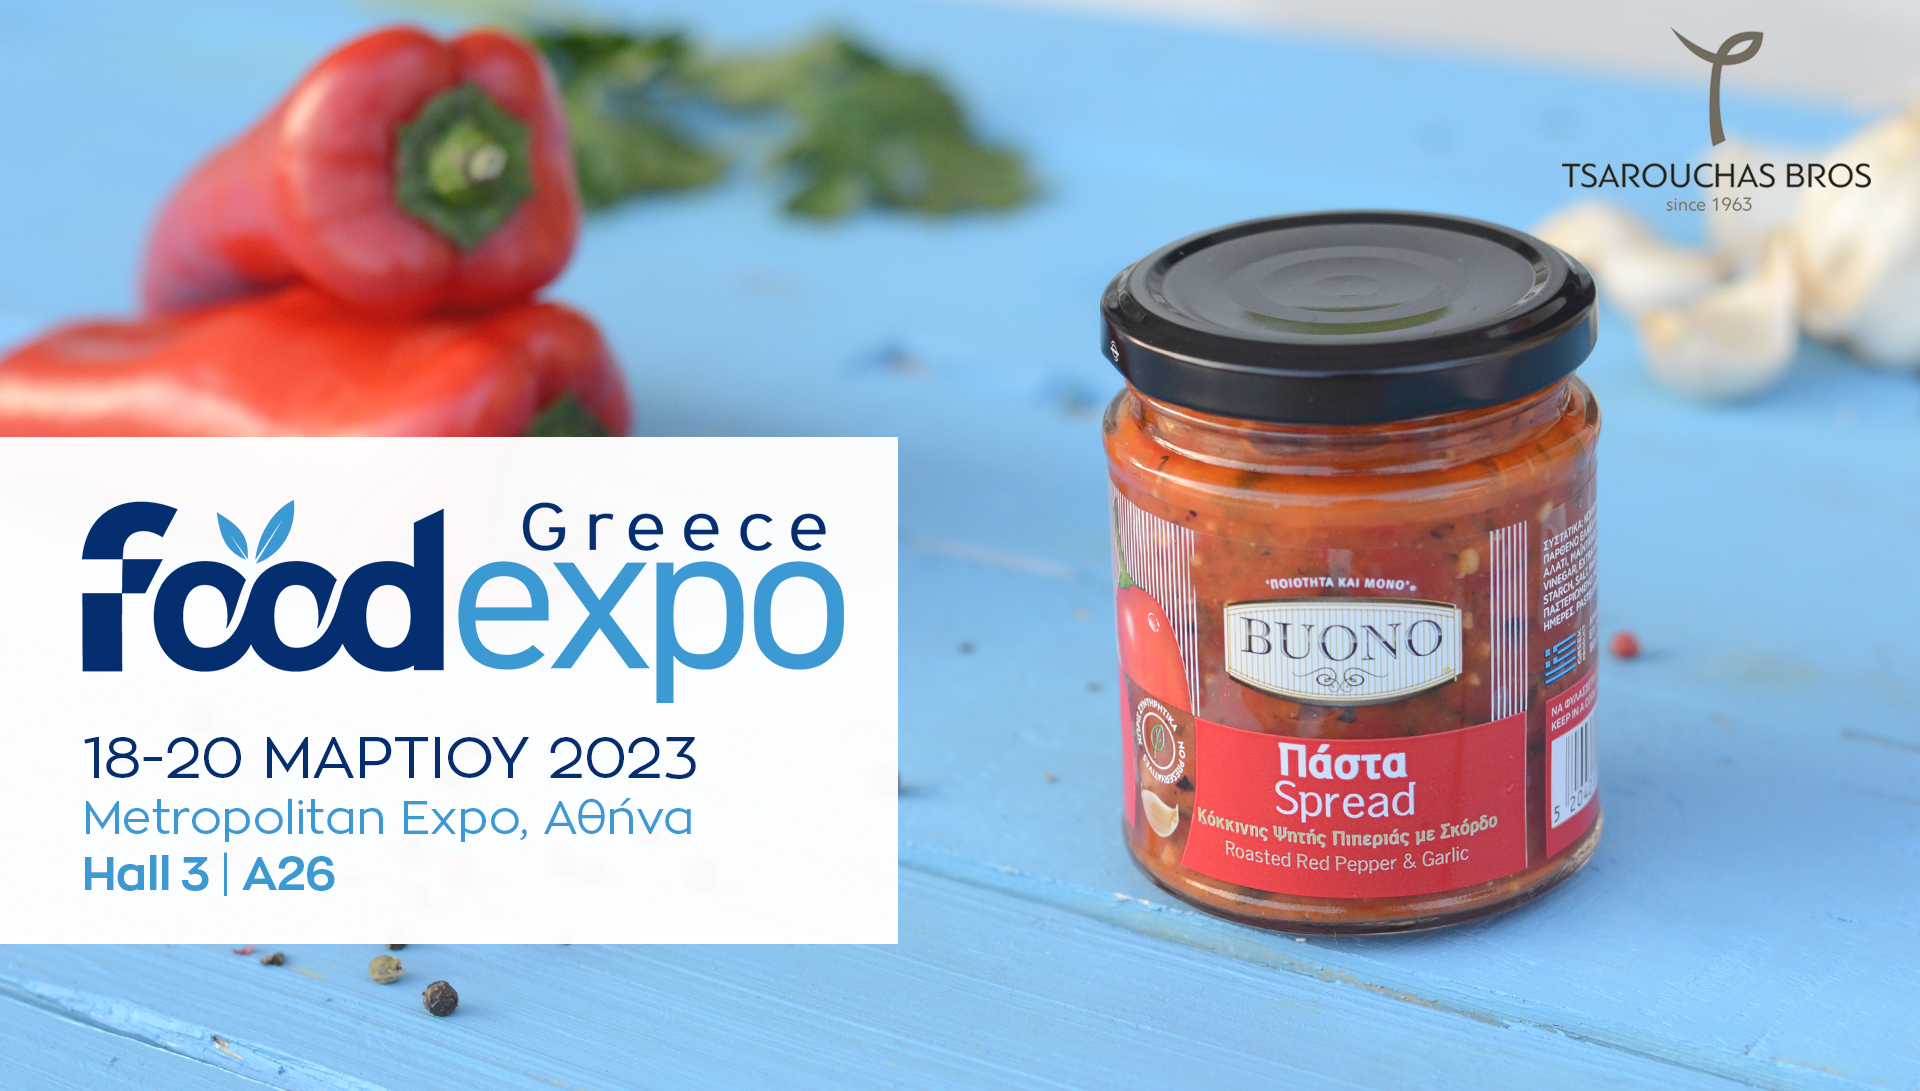 We participate in FOOD EXPO '23